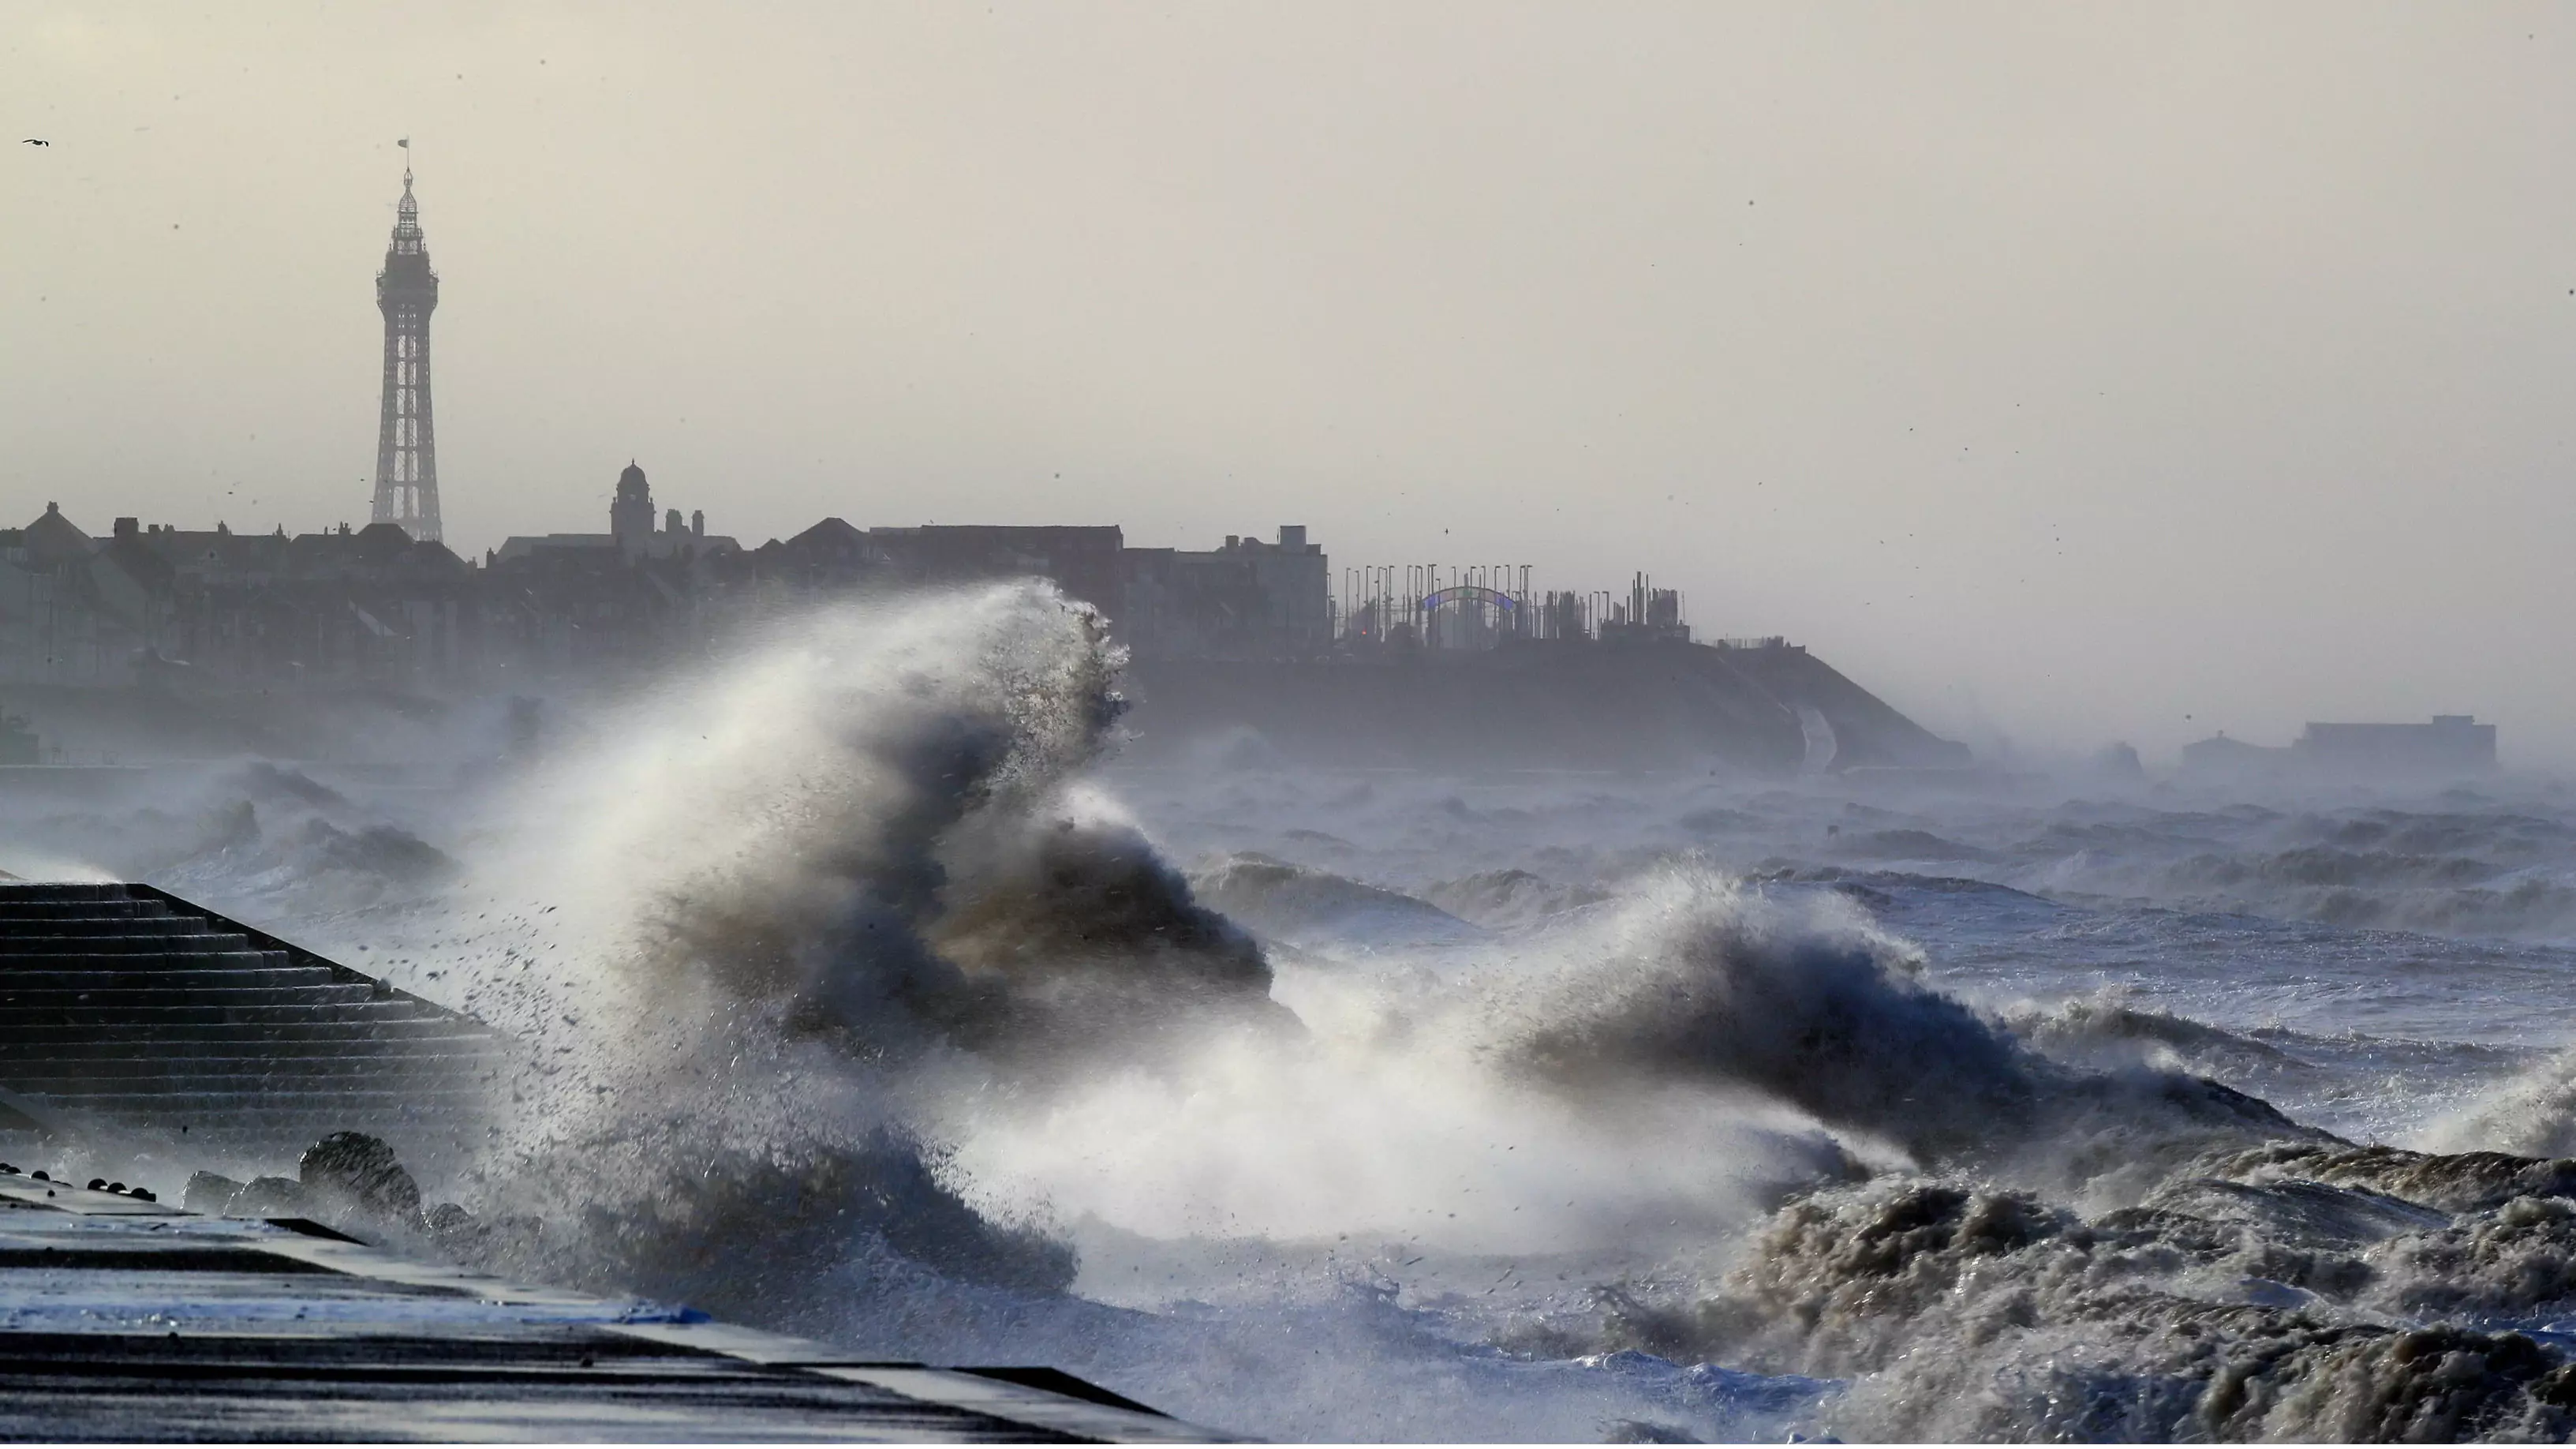 Met Office Issues Yellow Warning For '70mph' Wind From Storm Helene